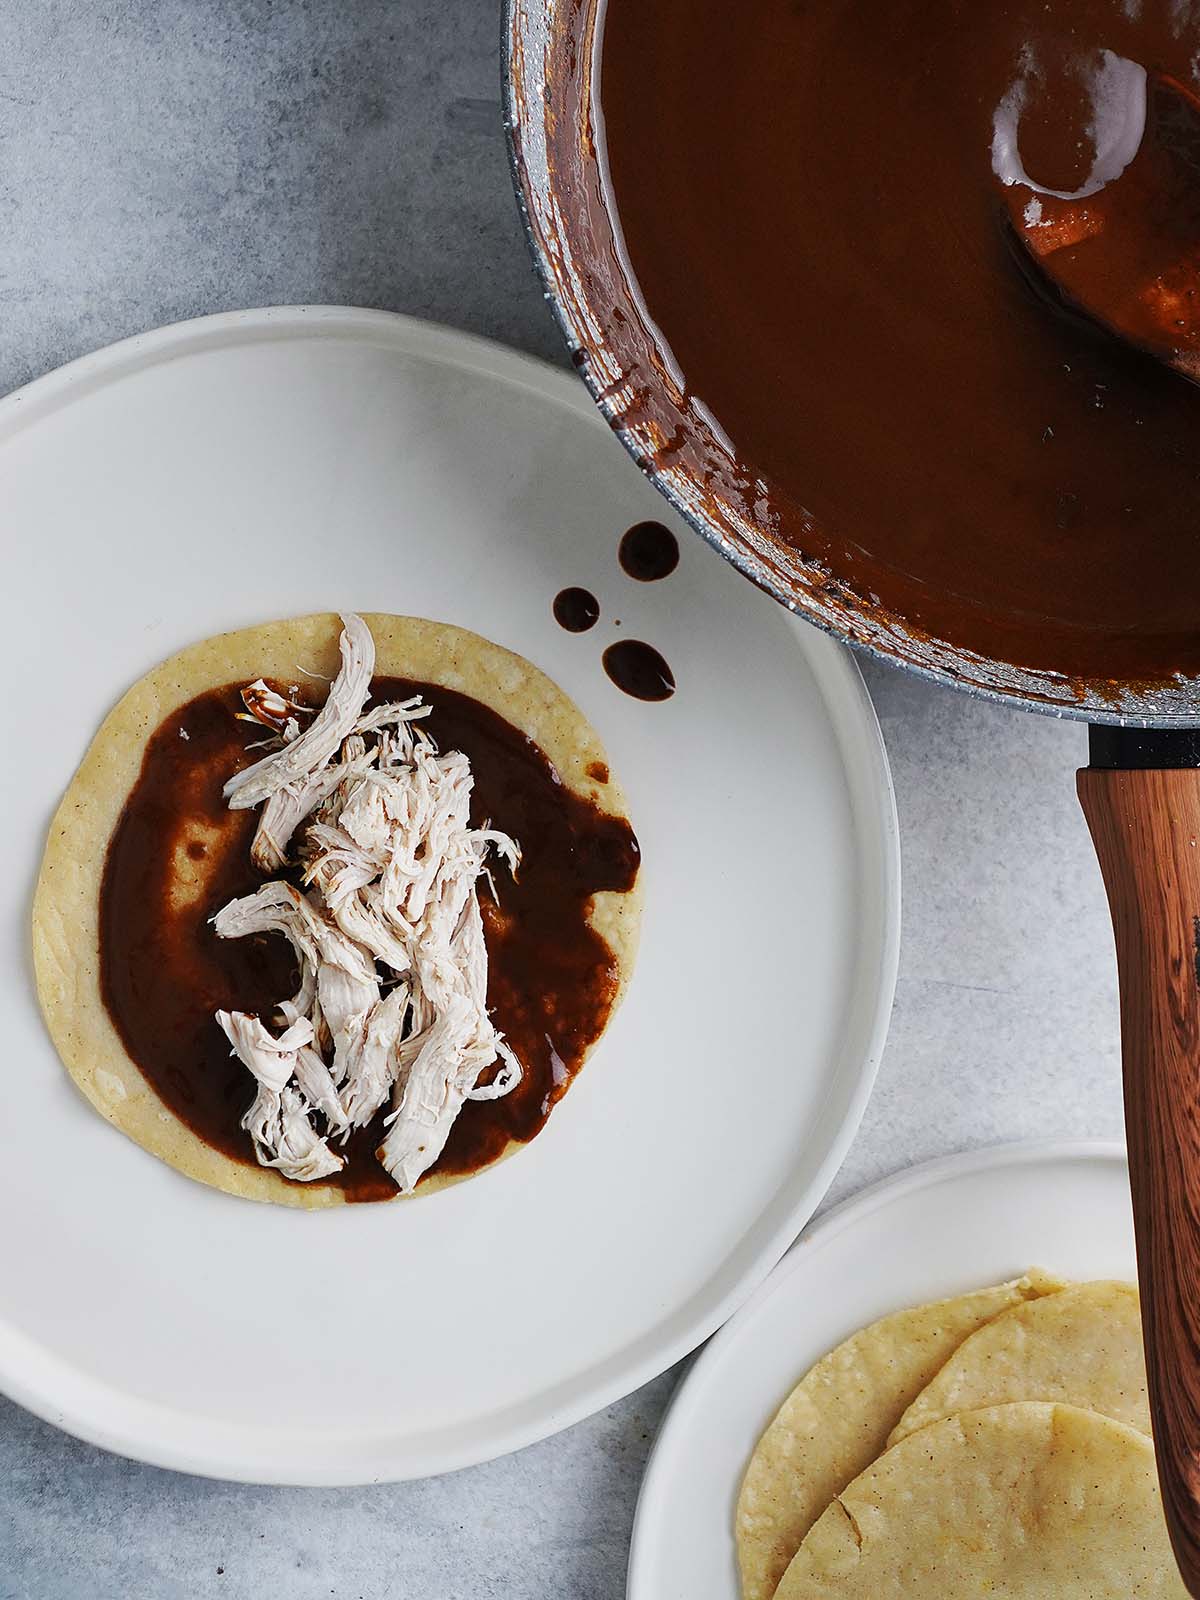 A corn tortilla with mole sauce and shredded chicken on the middle of the tortilla.